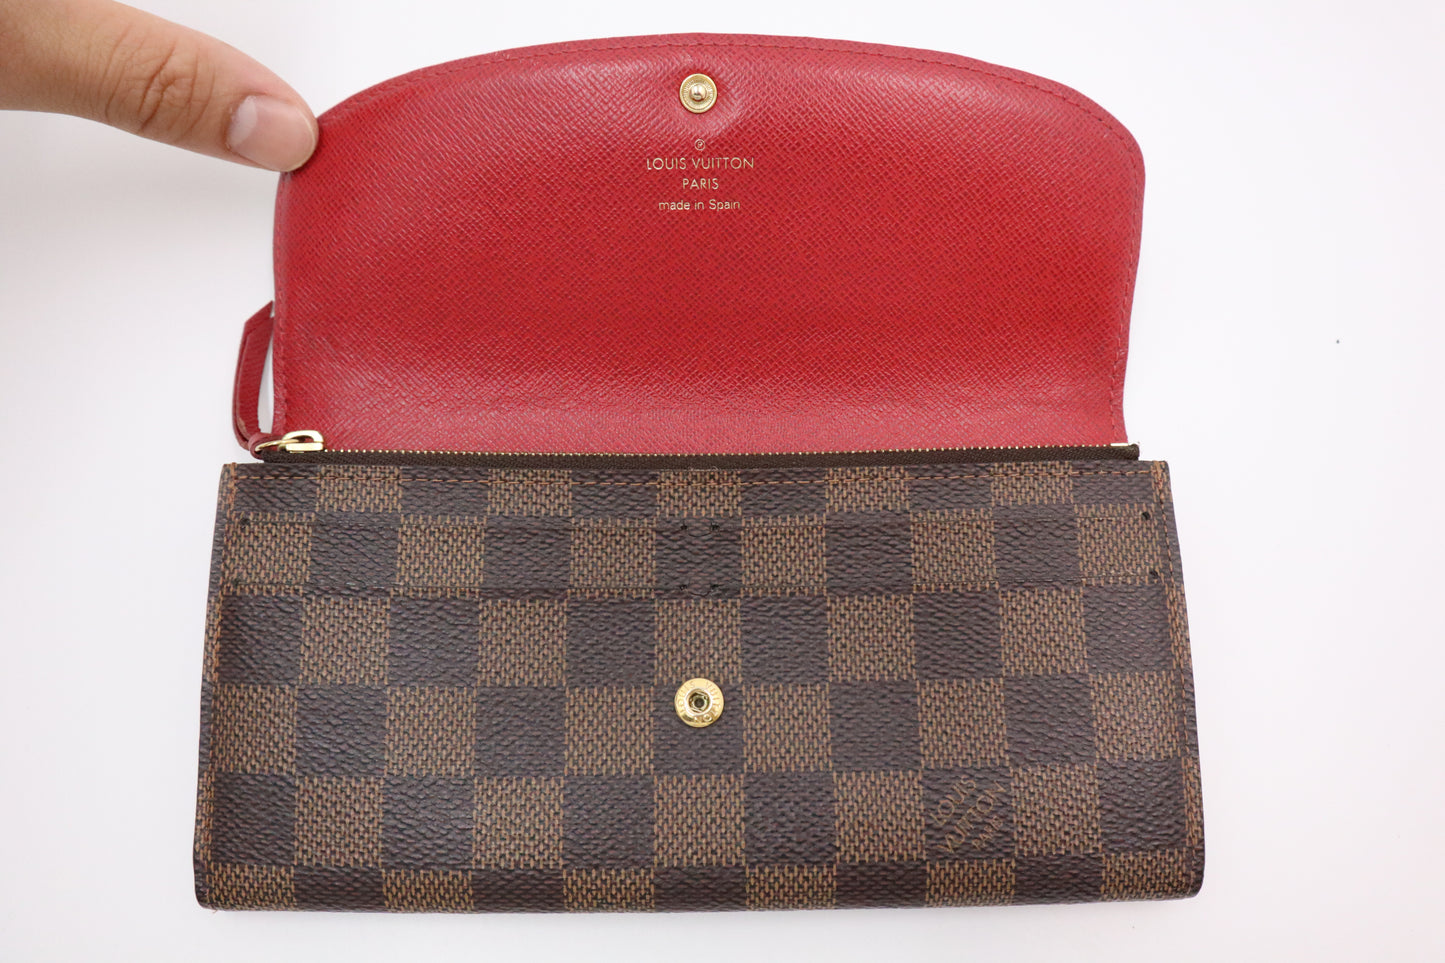 Louis Vuitton Emilie Wallet in Damier Graphite and Red Leather